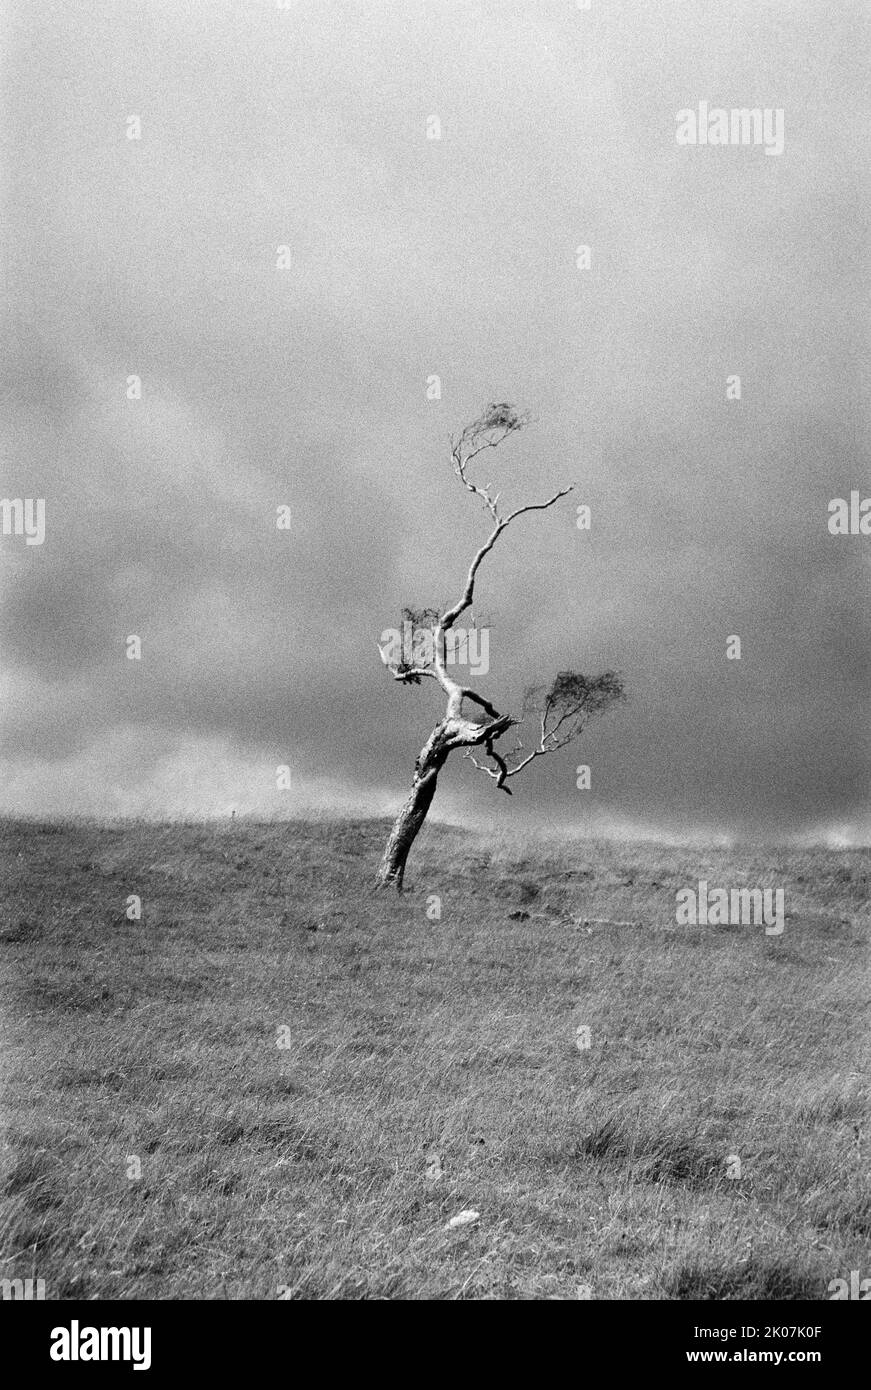 A single sunlit tree in front of storm clouds in a field in Northumberland, near Hadrian's Wall, shot on 35mm black and white film. Stock Photo